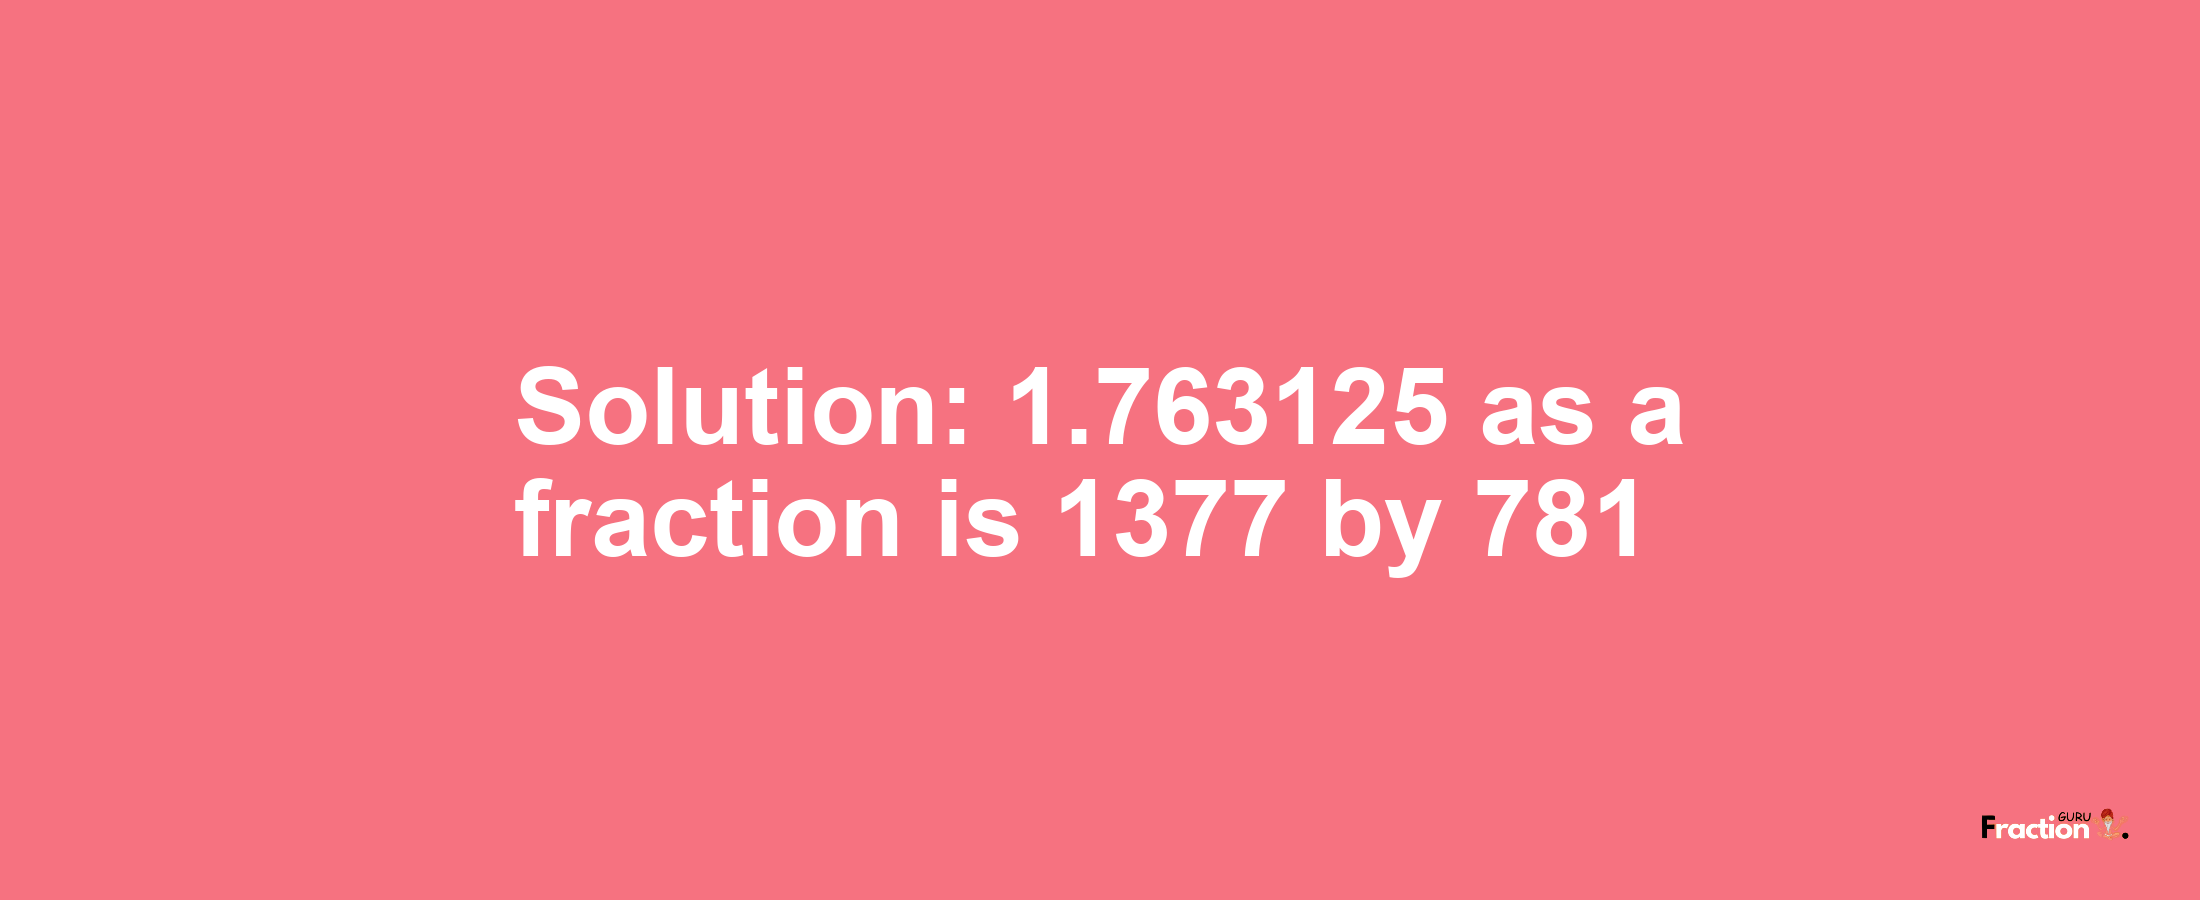 Solution:1.763125 as a fraction is 1377/781